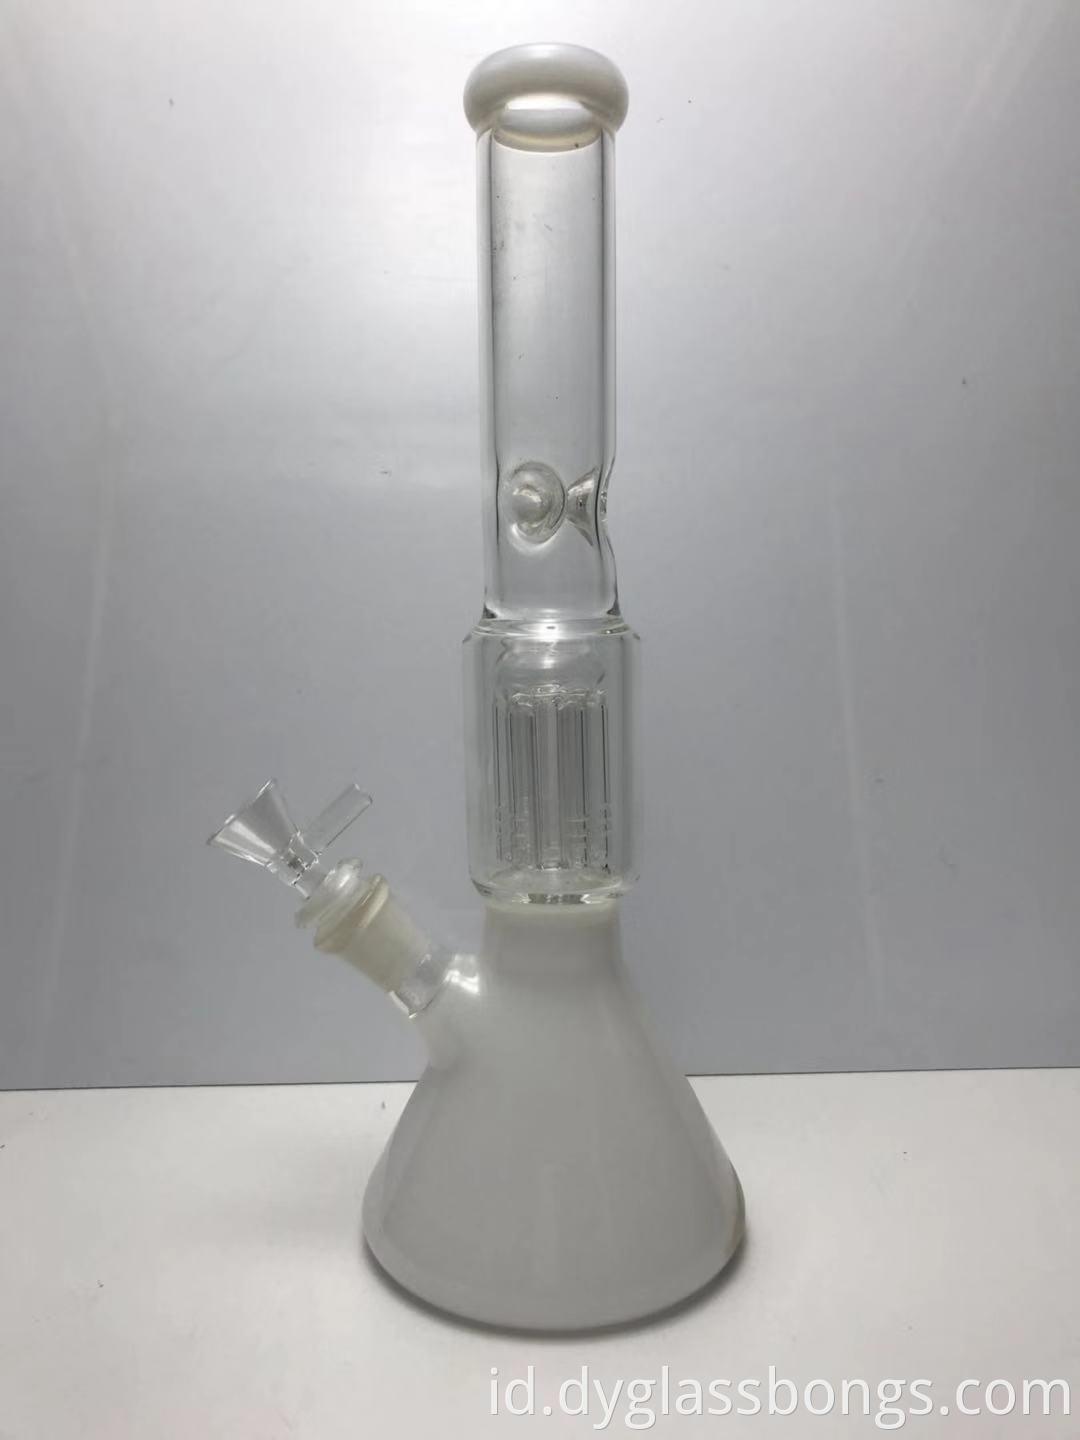 Recycle Oil Gigs Glass Bongs